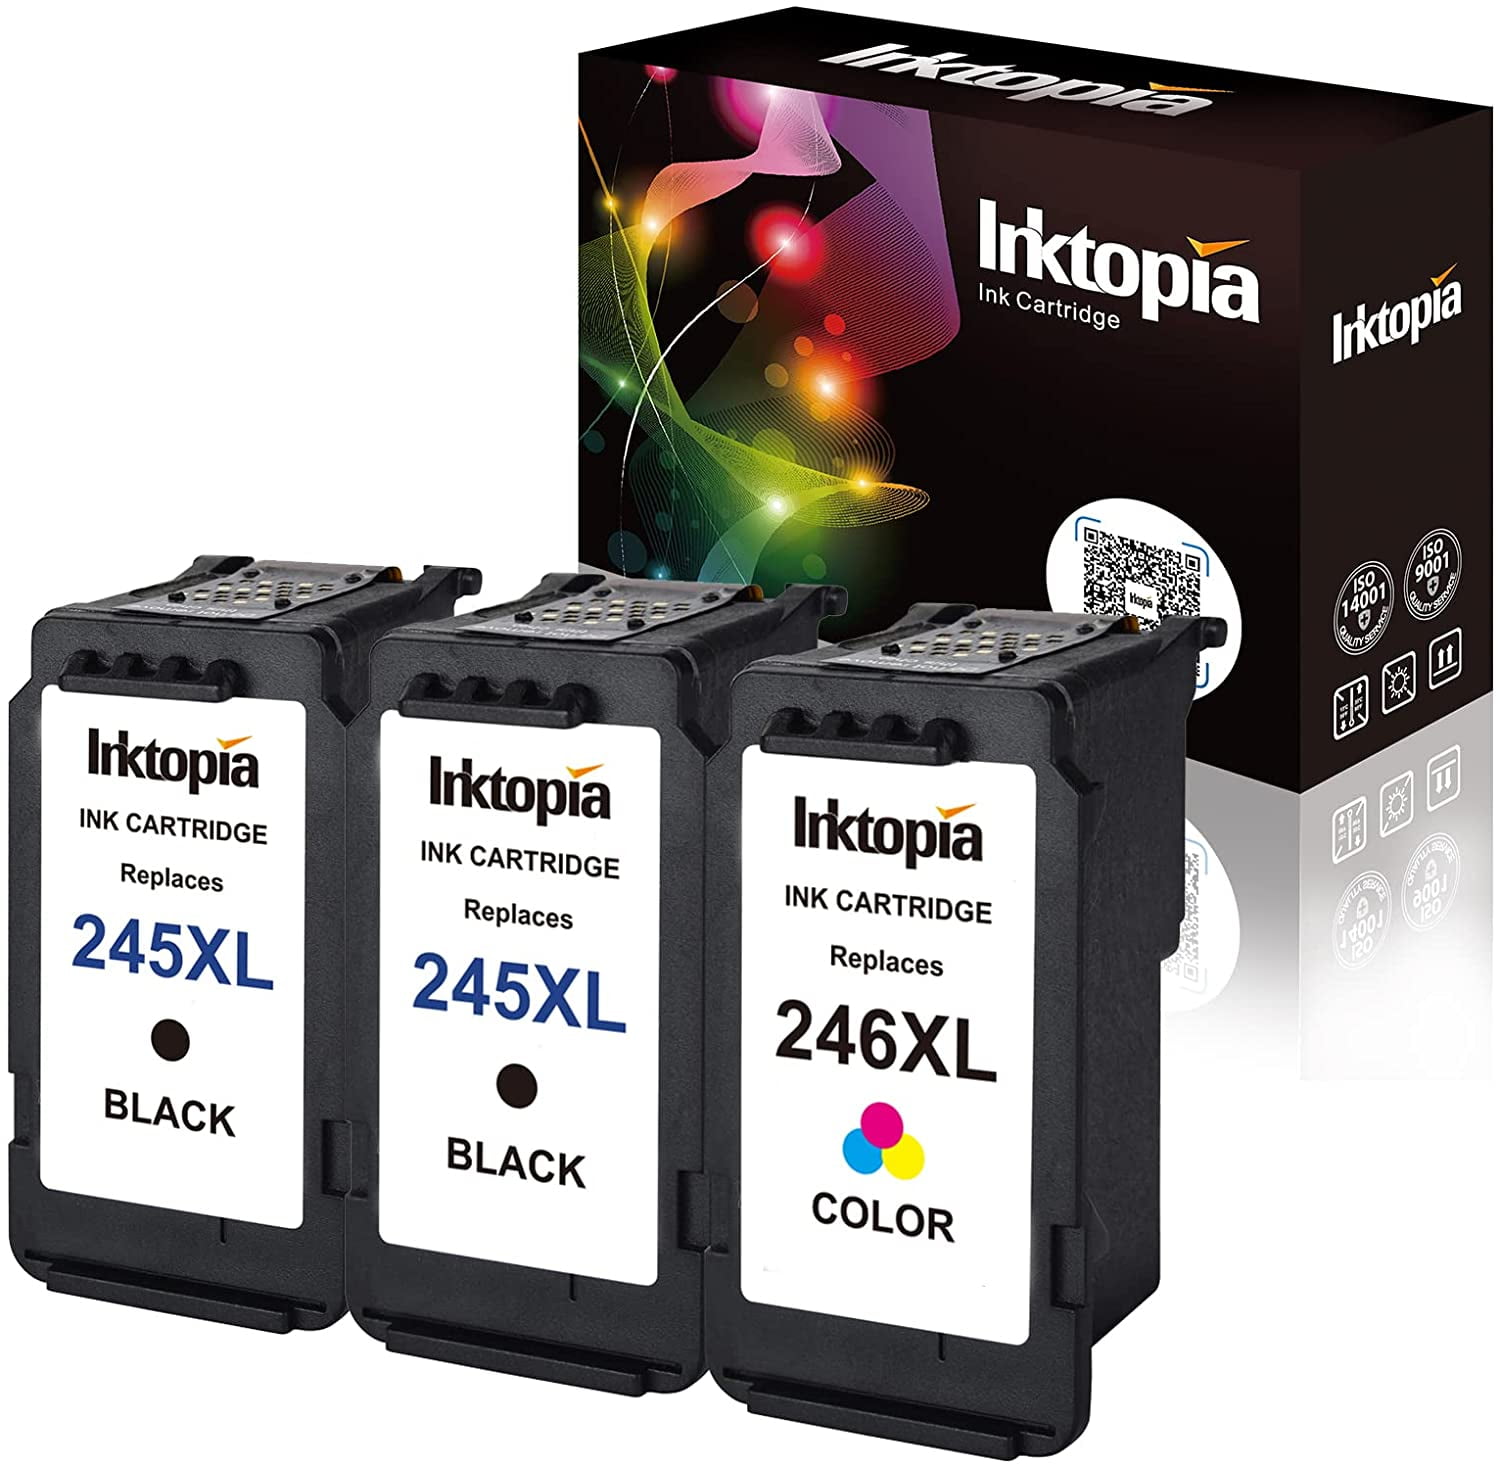 Used in Canon PIXMA MG2520 MG2920 MG2922 MG2924 MG2420 MG2522 MG2525 MG3020 MG2555 MX490 MX492 Printer Remanufactured for Canon PG-245XL Ink Cartridges 2 Black Shows Accurate Ink Level 